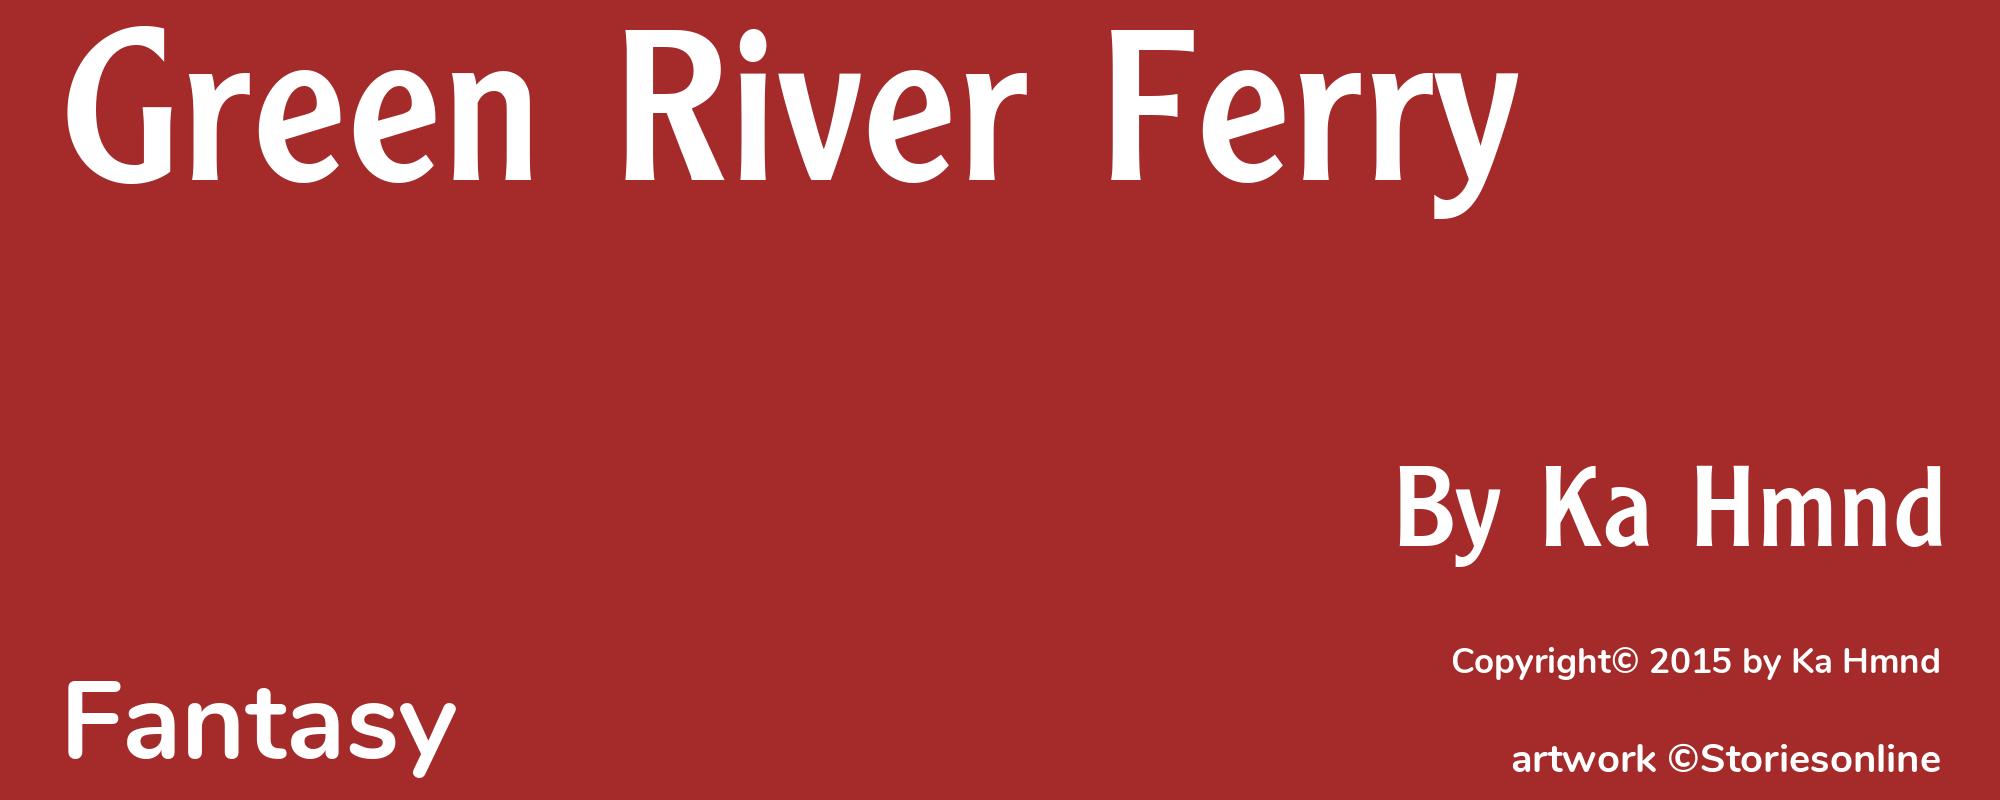 Green River Ferry - Cover